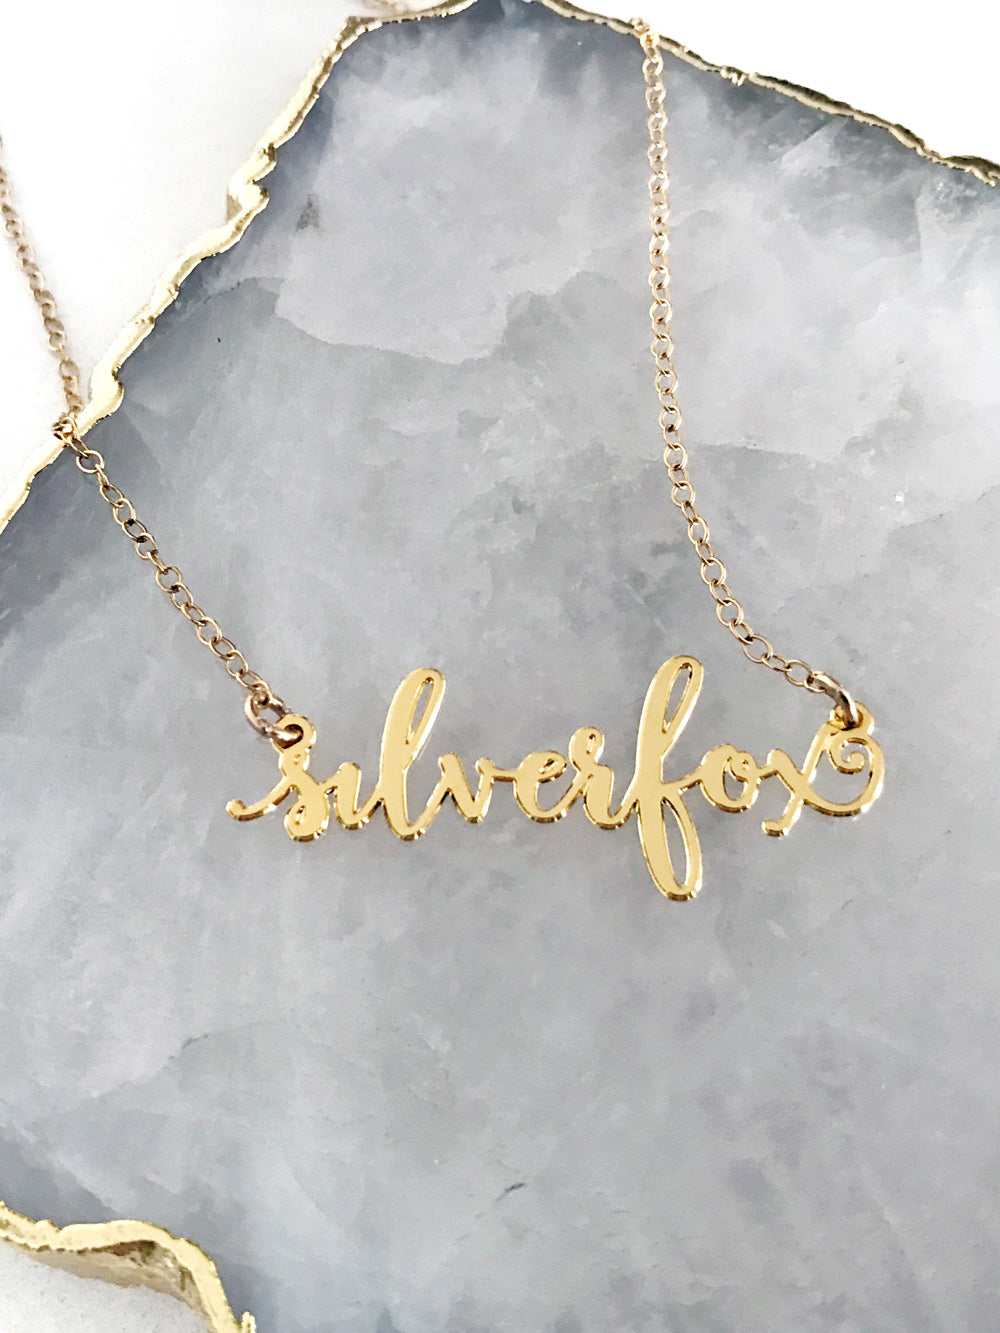 Silver Fox Necklace - High Quality, Affordable, Calligraphy, Empowering, Self Love, Mantra Word Necklace - Silver Sisters Unite - Available in Gold and Silver - Made in USA - Brevity Jewelry